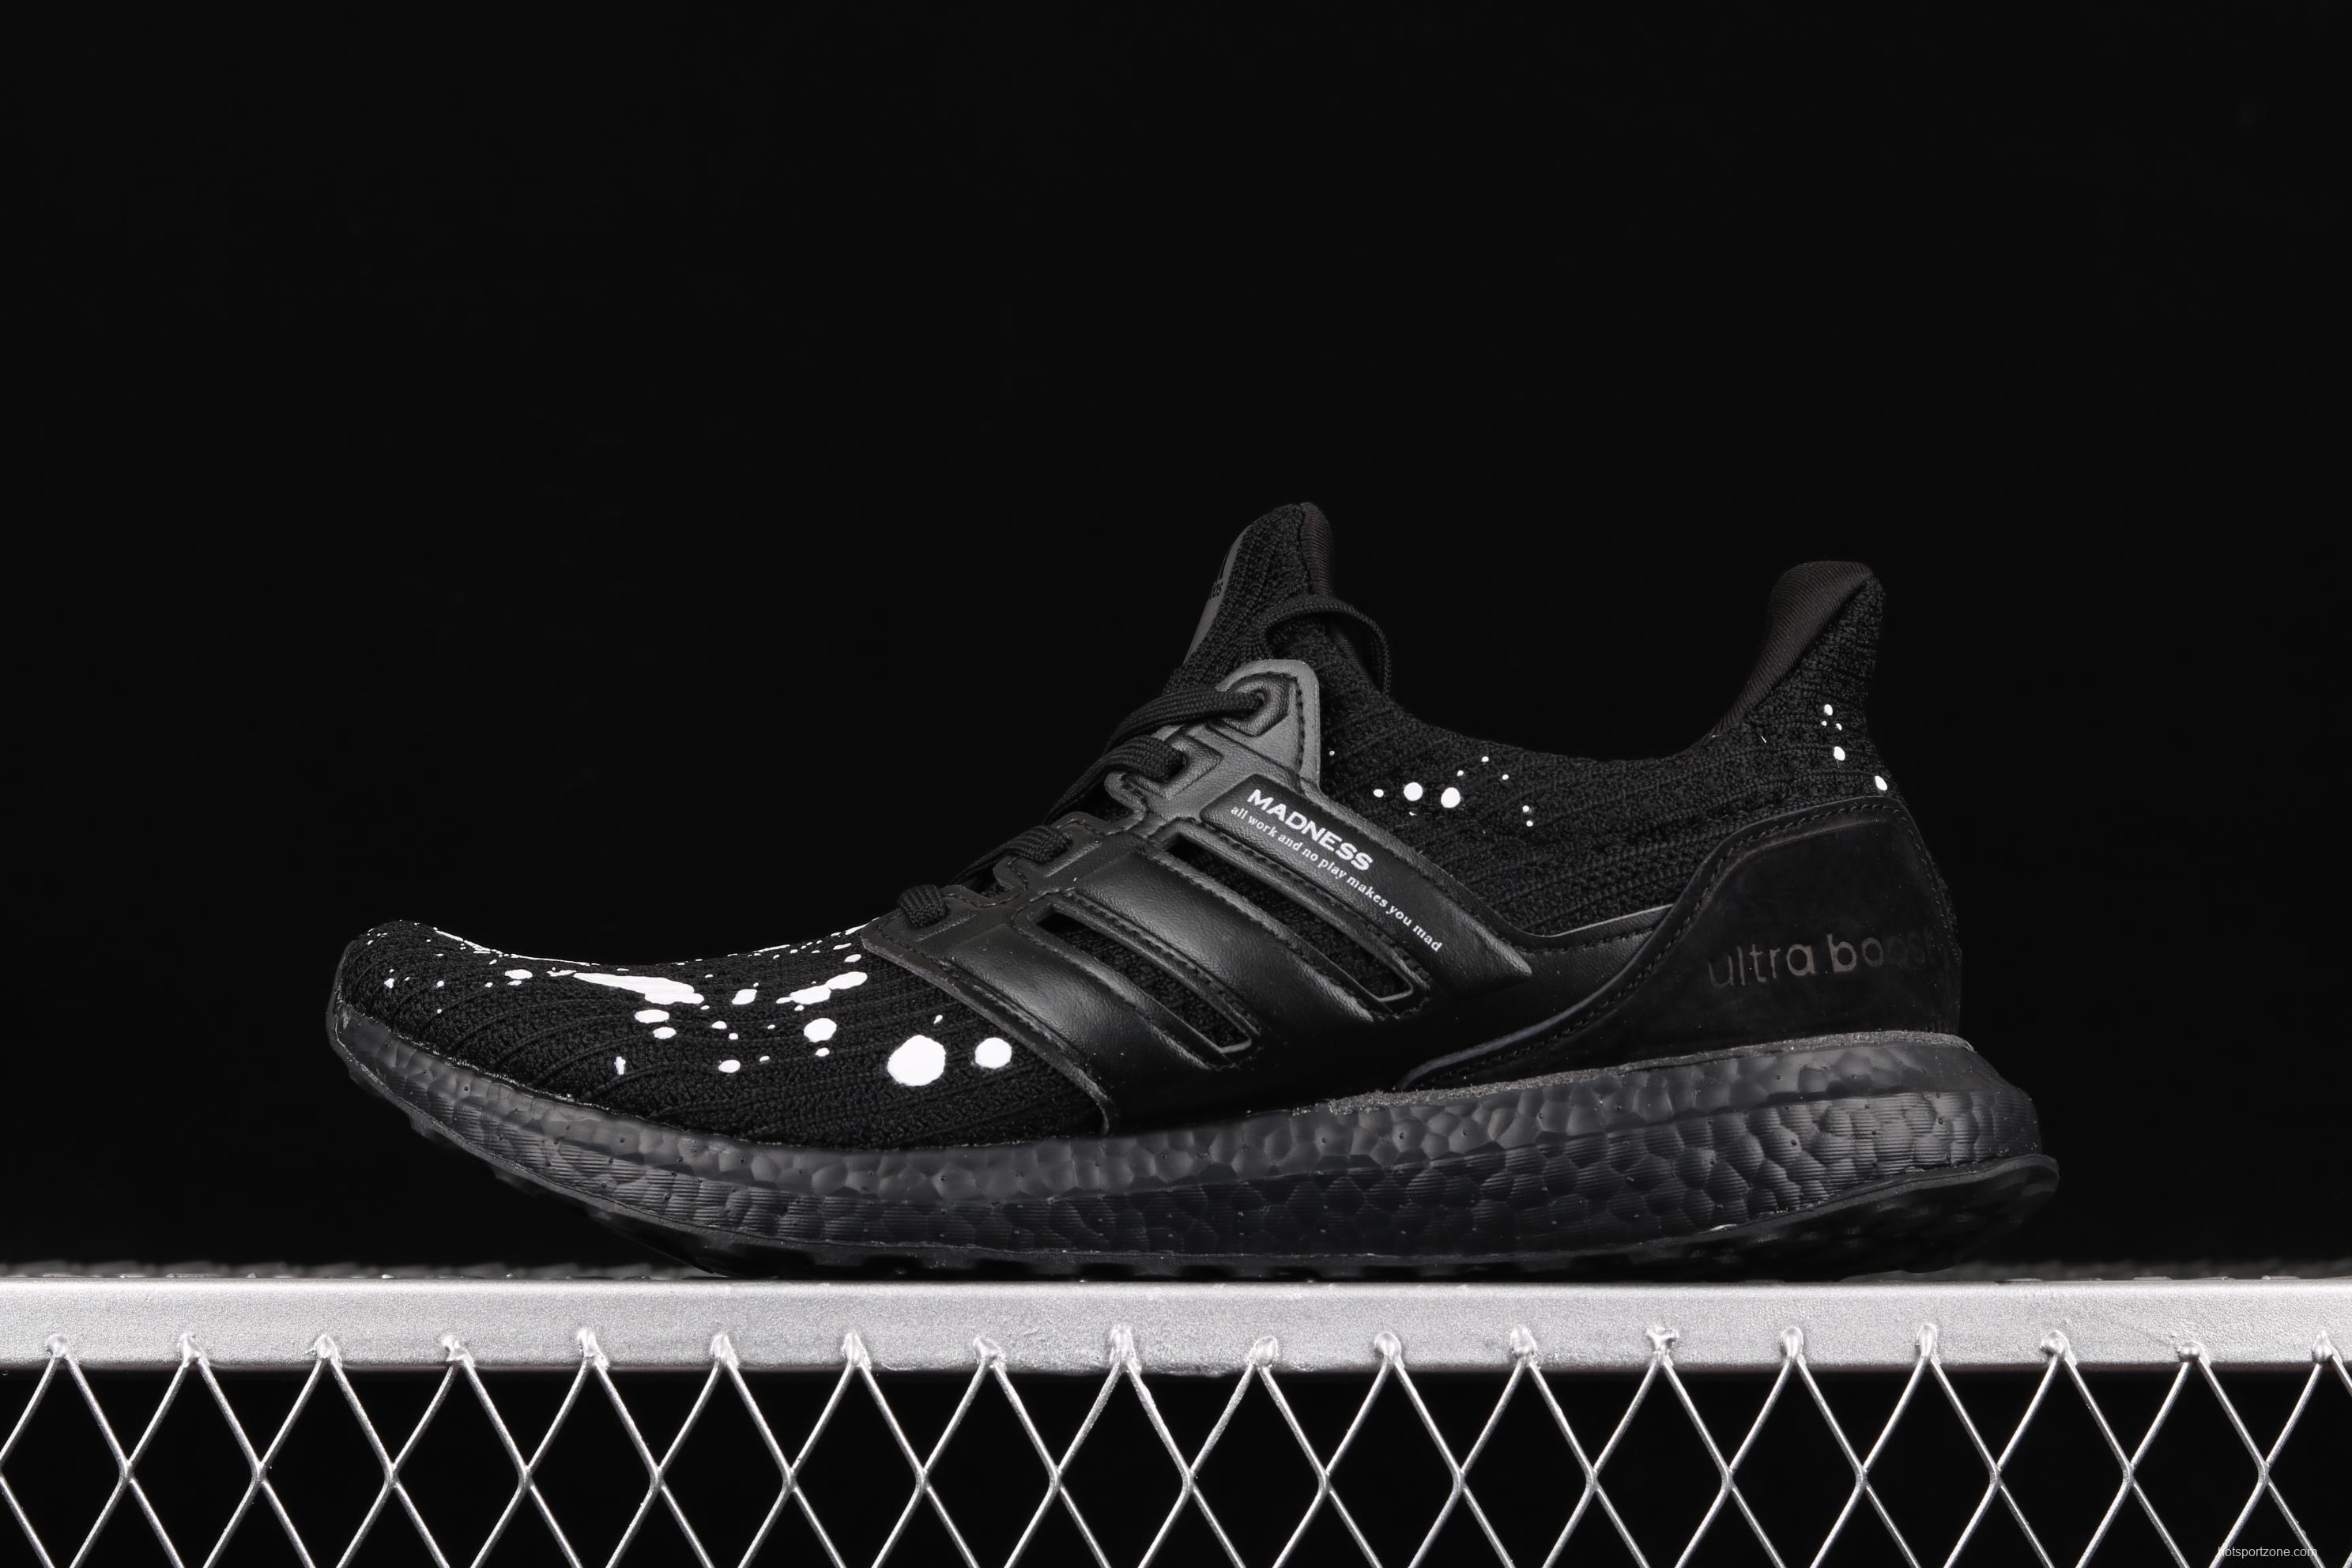 MAdidasness x Adidas Ultra Boost 4.0EF0144 limited joint style shock absorber running shoes